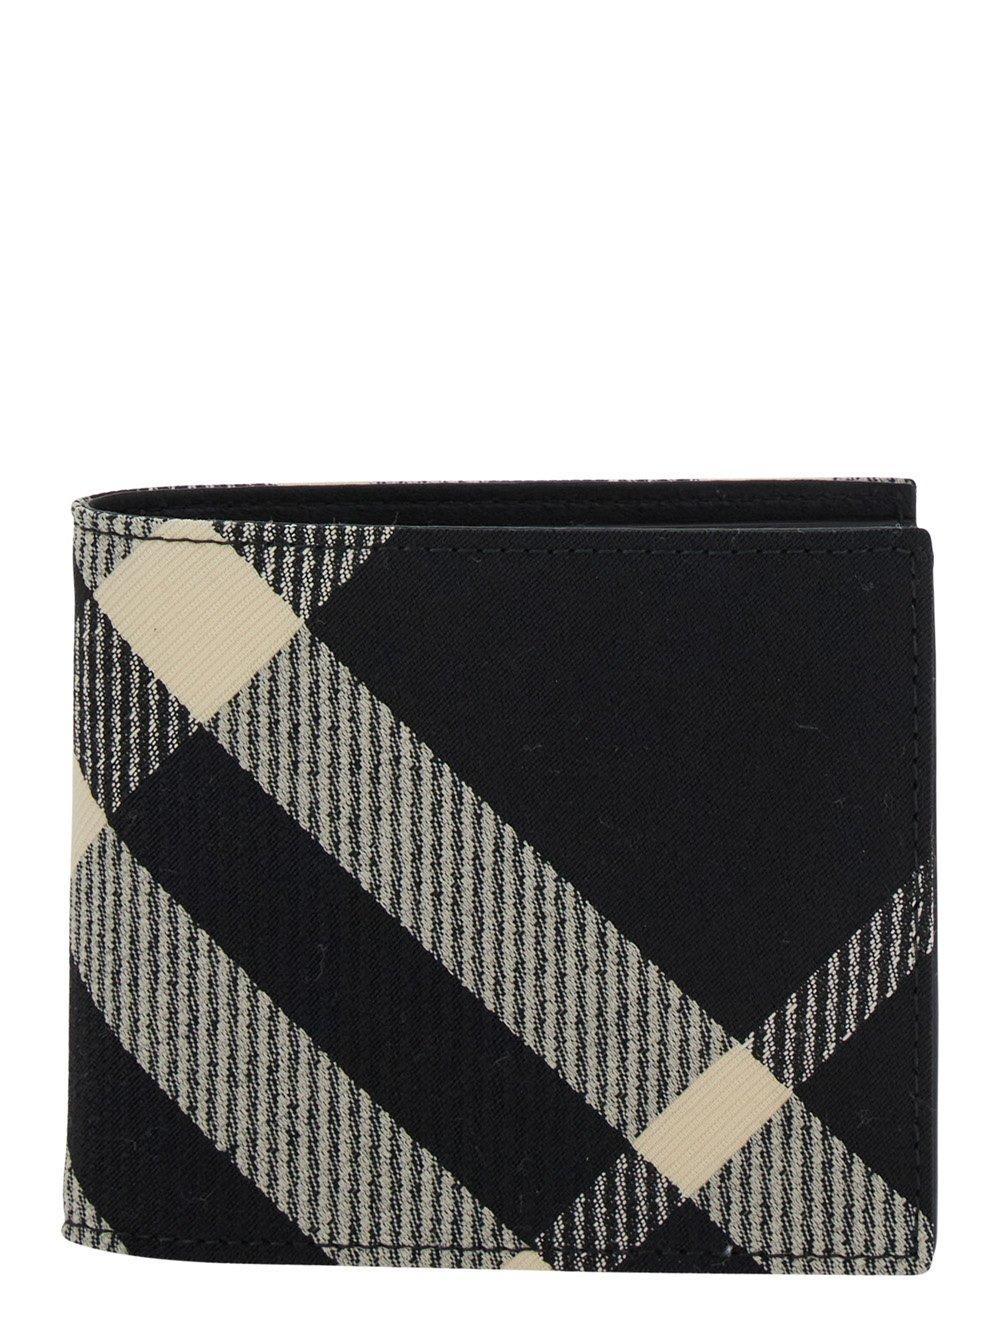 Shop Burberry Check Patterned Bi-fold Wallet In Black Calico